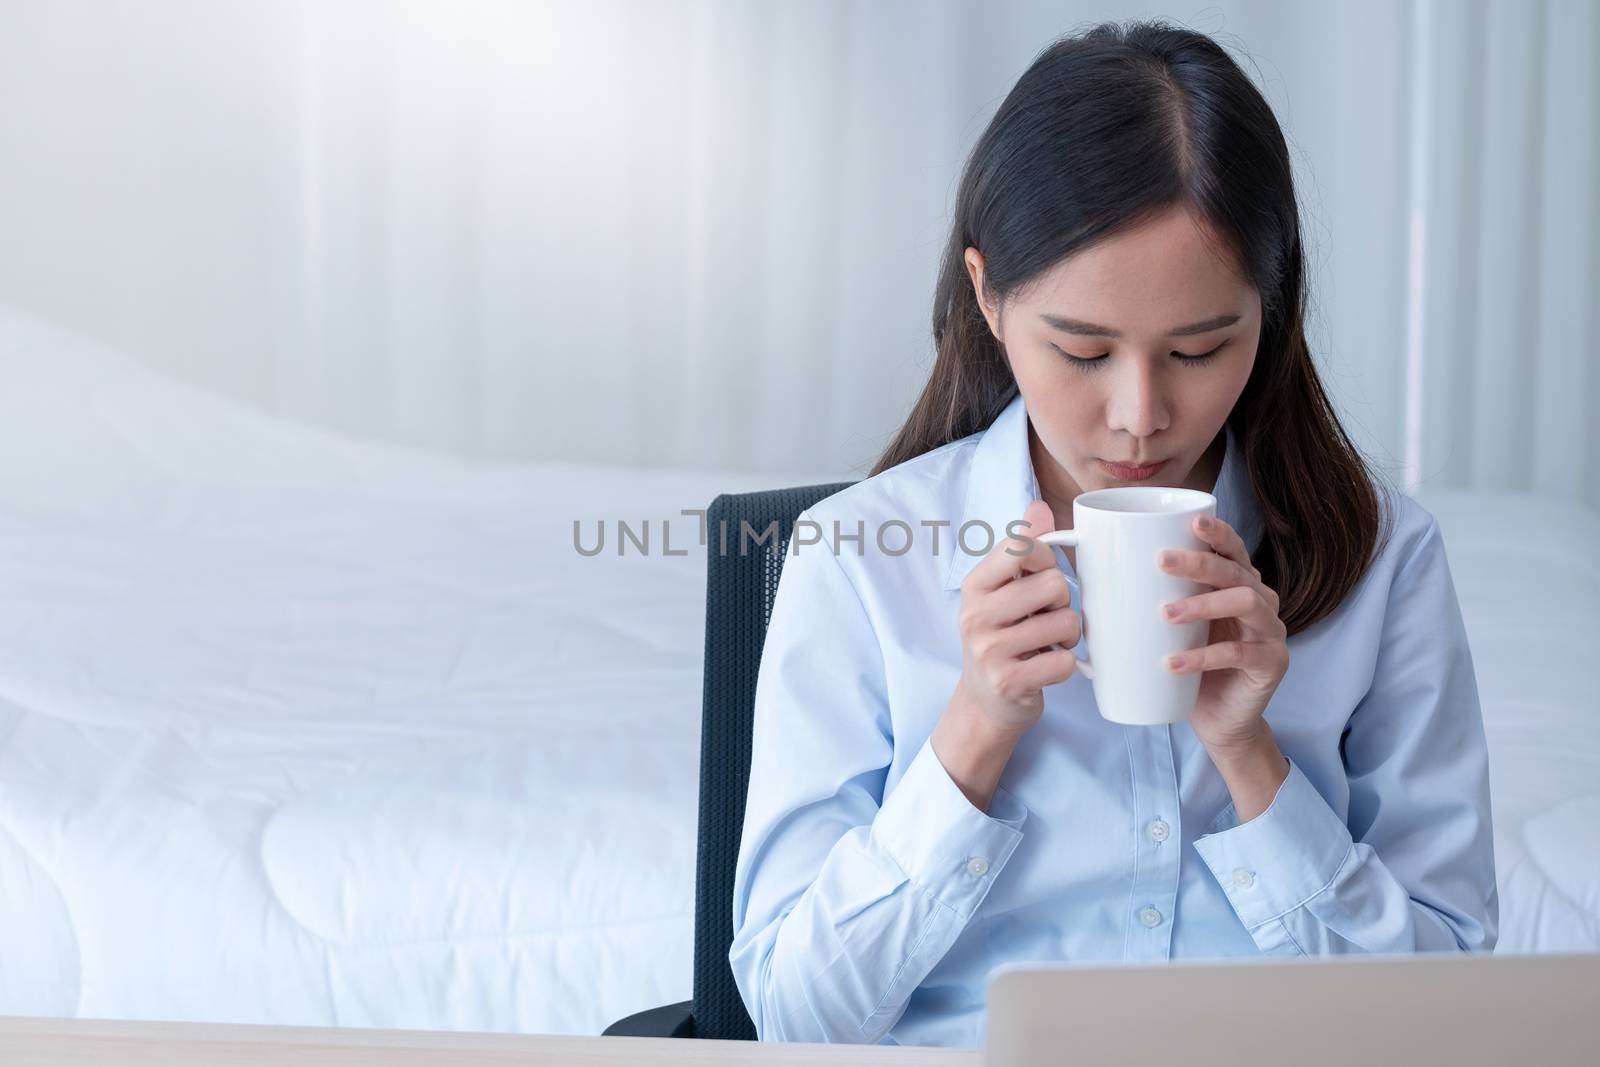 Front view of pretty business girl with blue shirt drink coffee from ceramic glass during work at home in the bedroom with morning light.She look relax and happy even though corona virus pandemic.